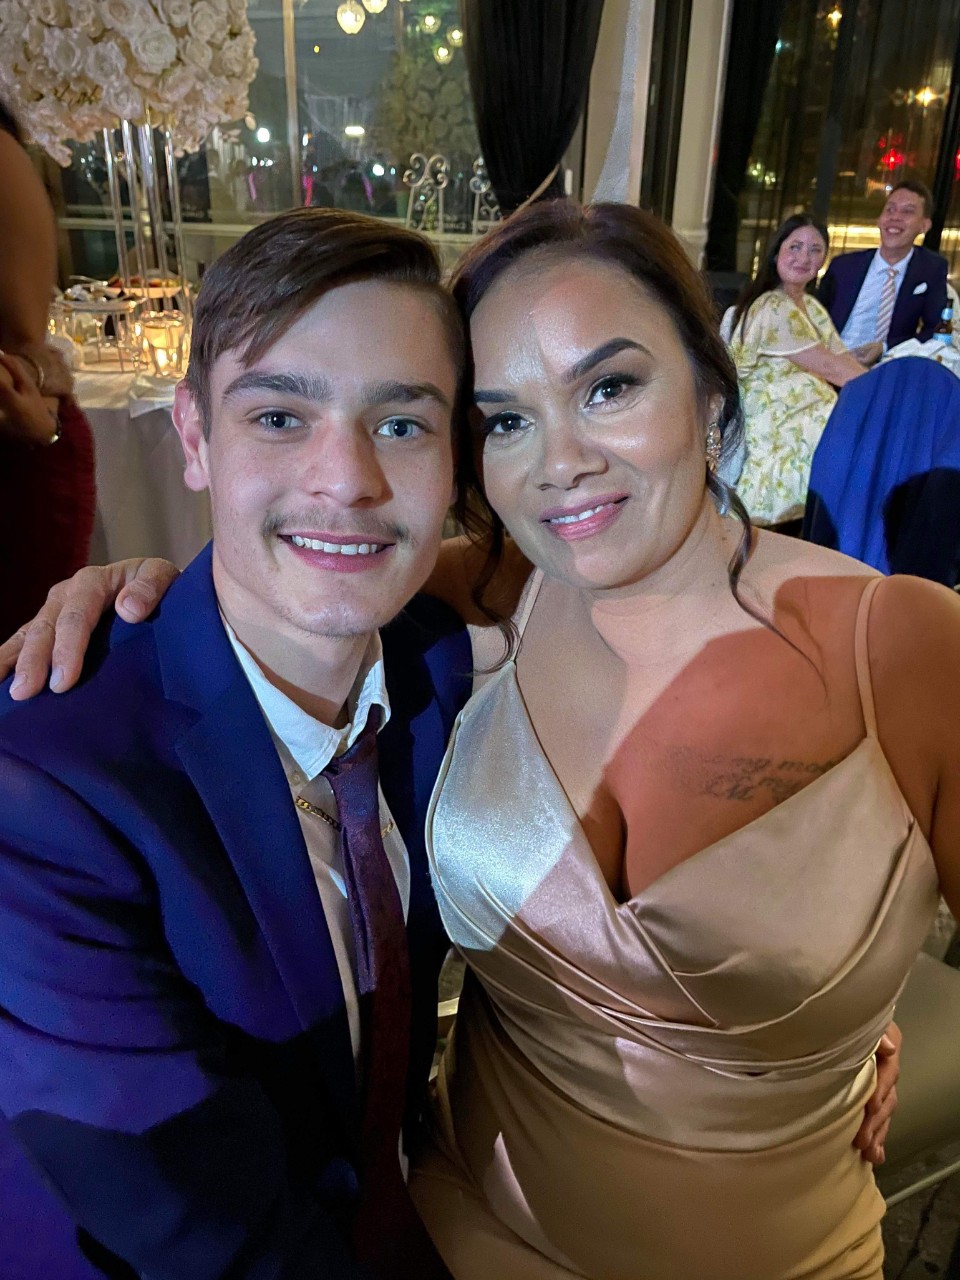 Dylan (right) with a woman at an event. He is wearing a blue suit with a white shirt underneath. 